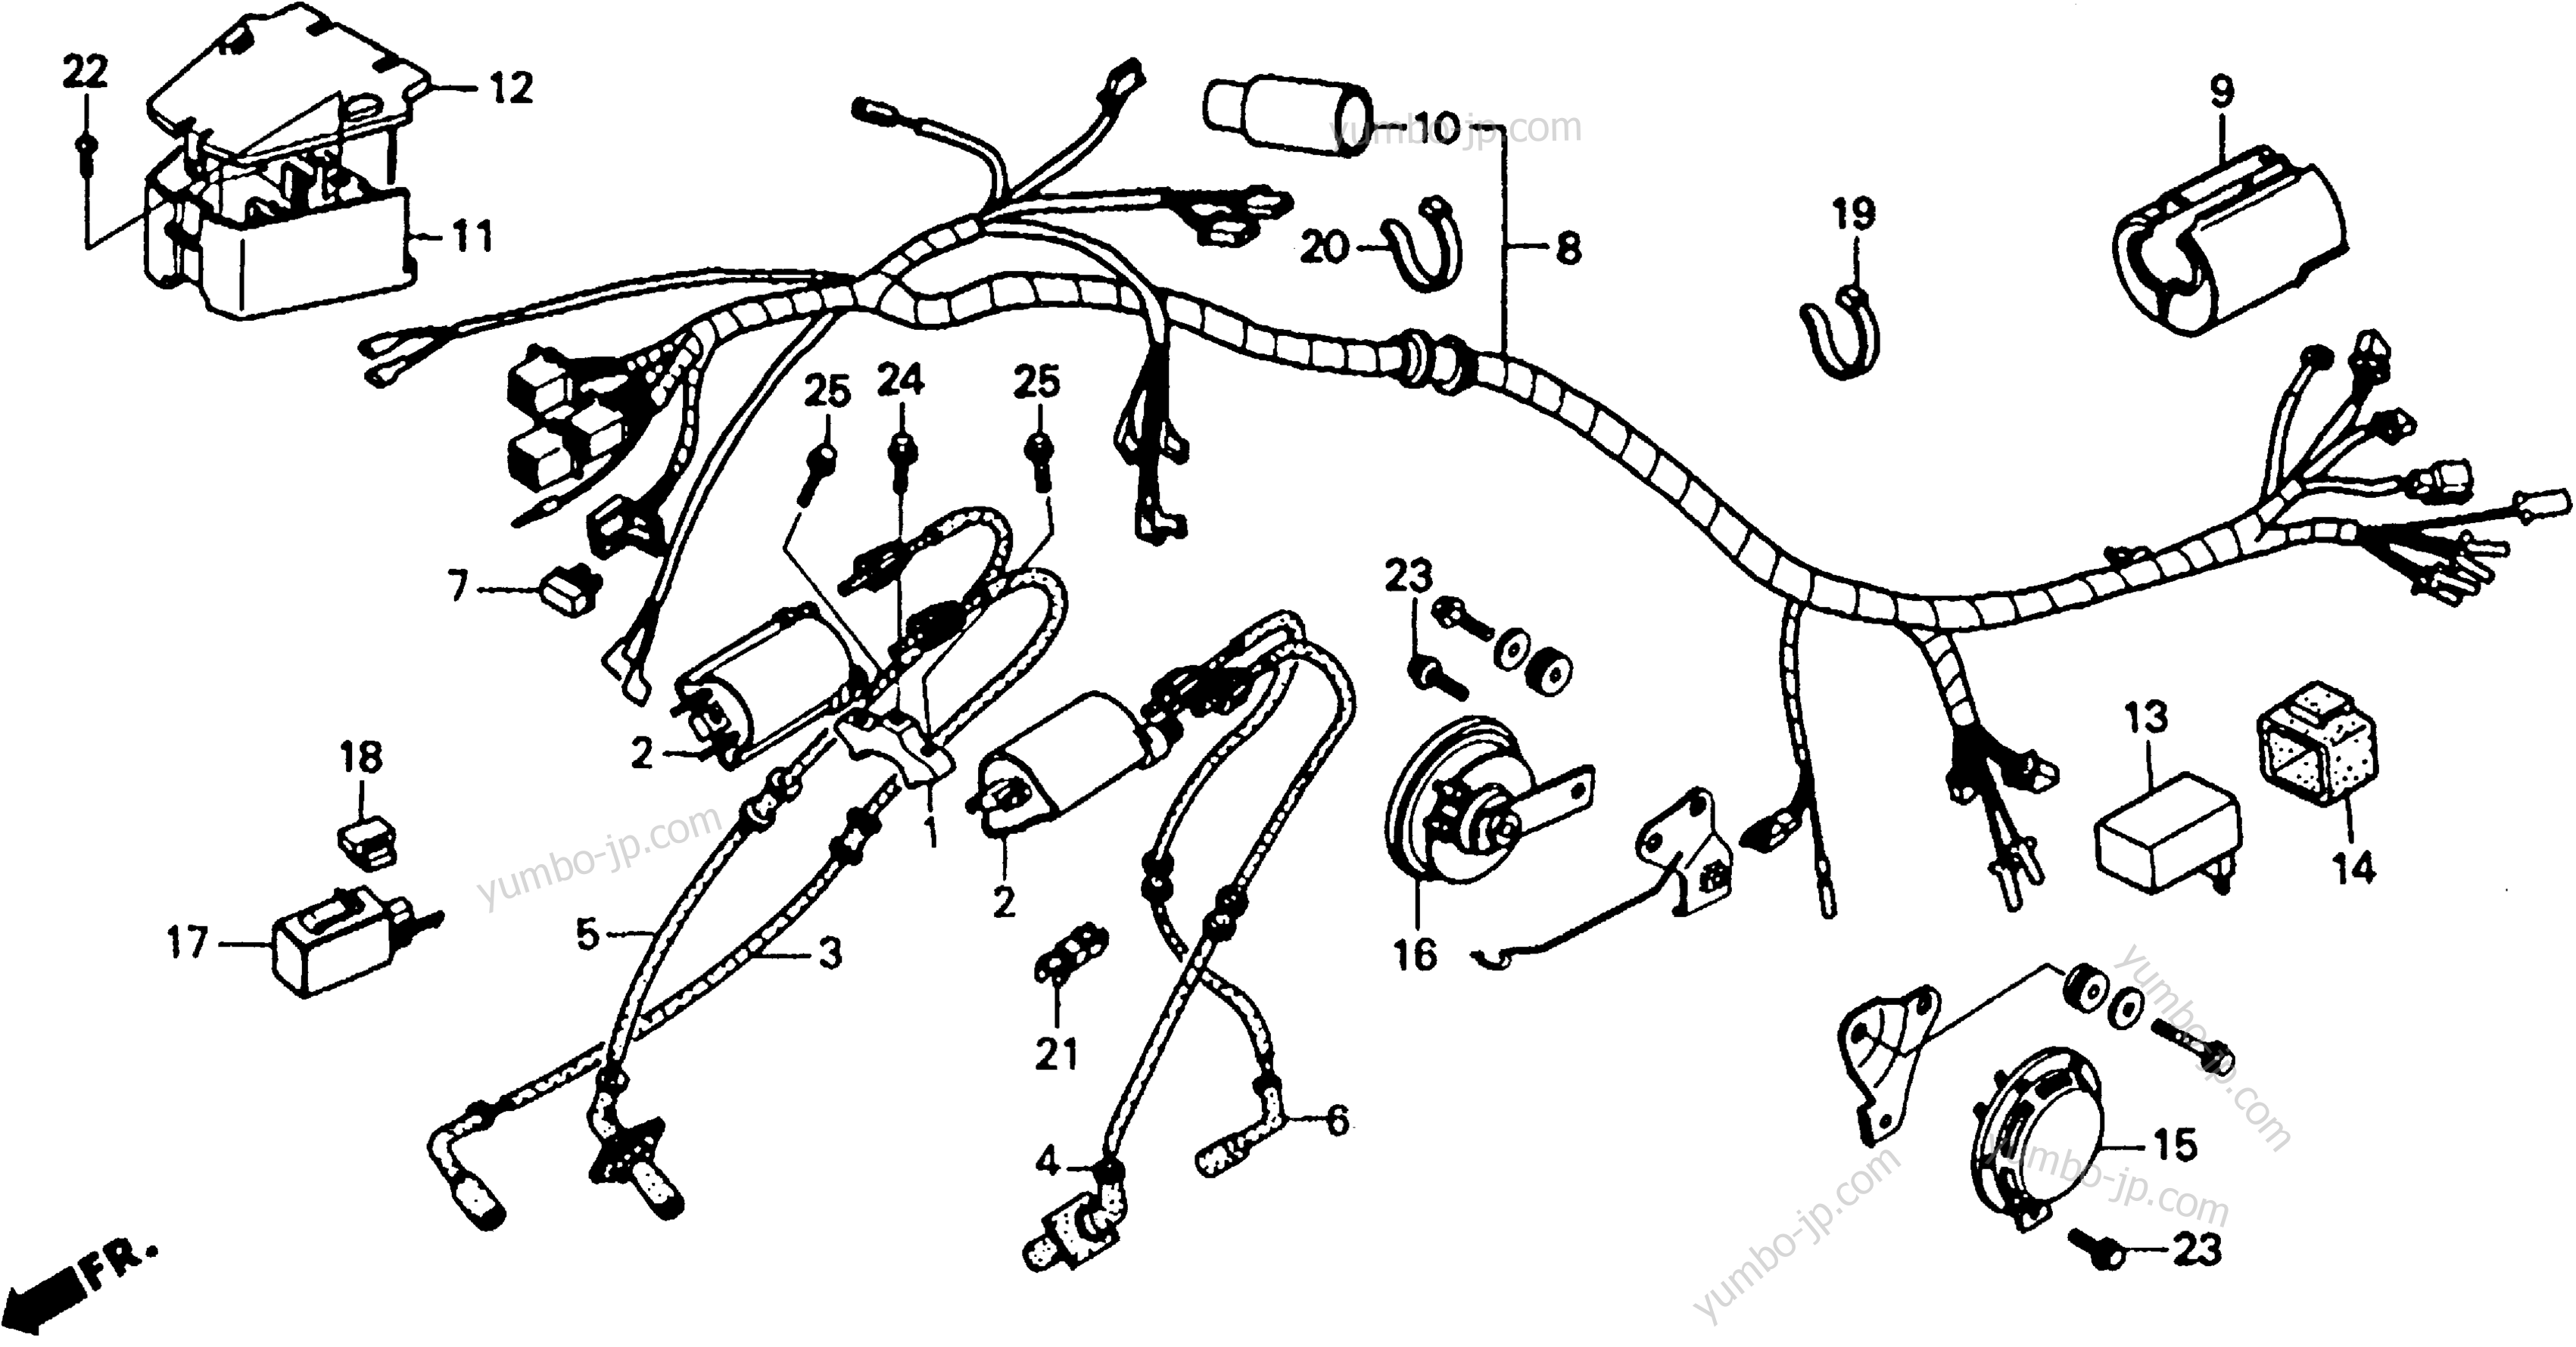 WIRE HARNESS for motorcycles HONDA VT1100C AC 1992 year